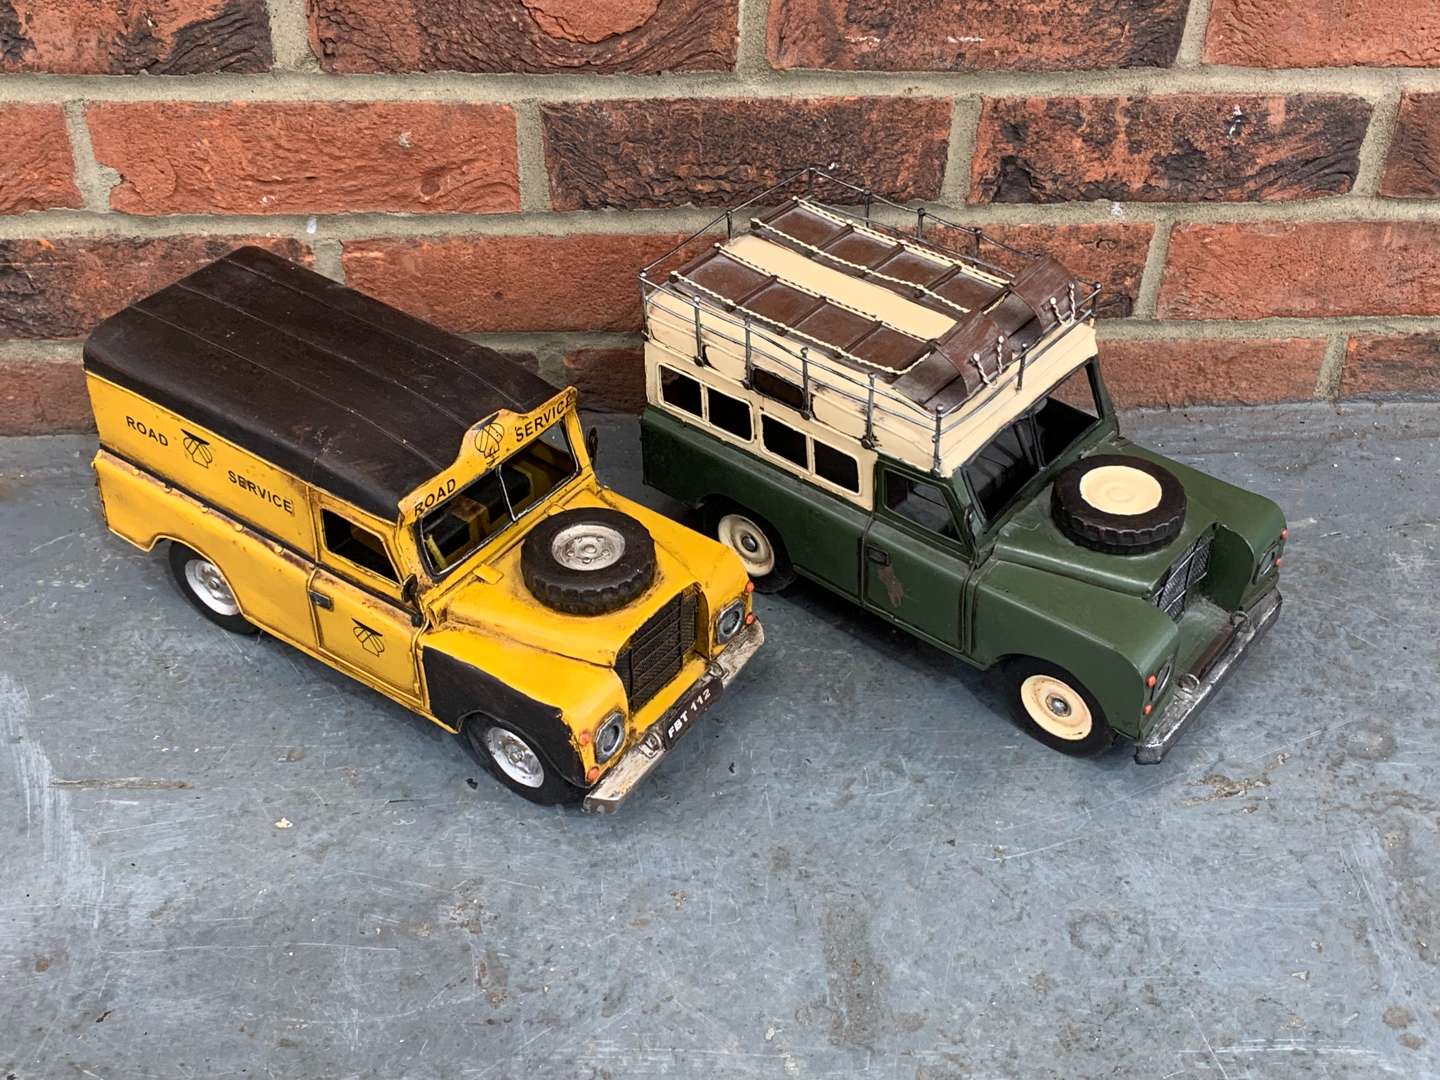 <p>Two Modern Metal Land Rover Model Cars</p>